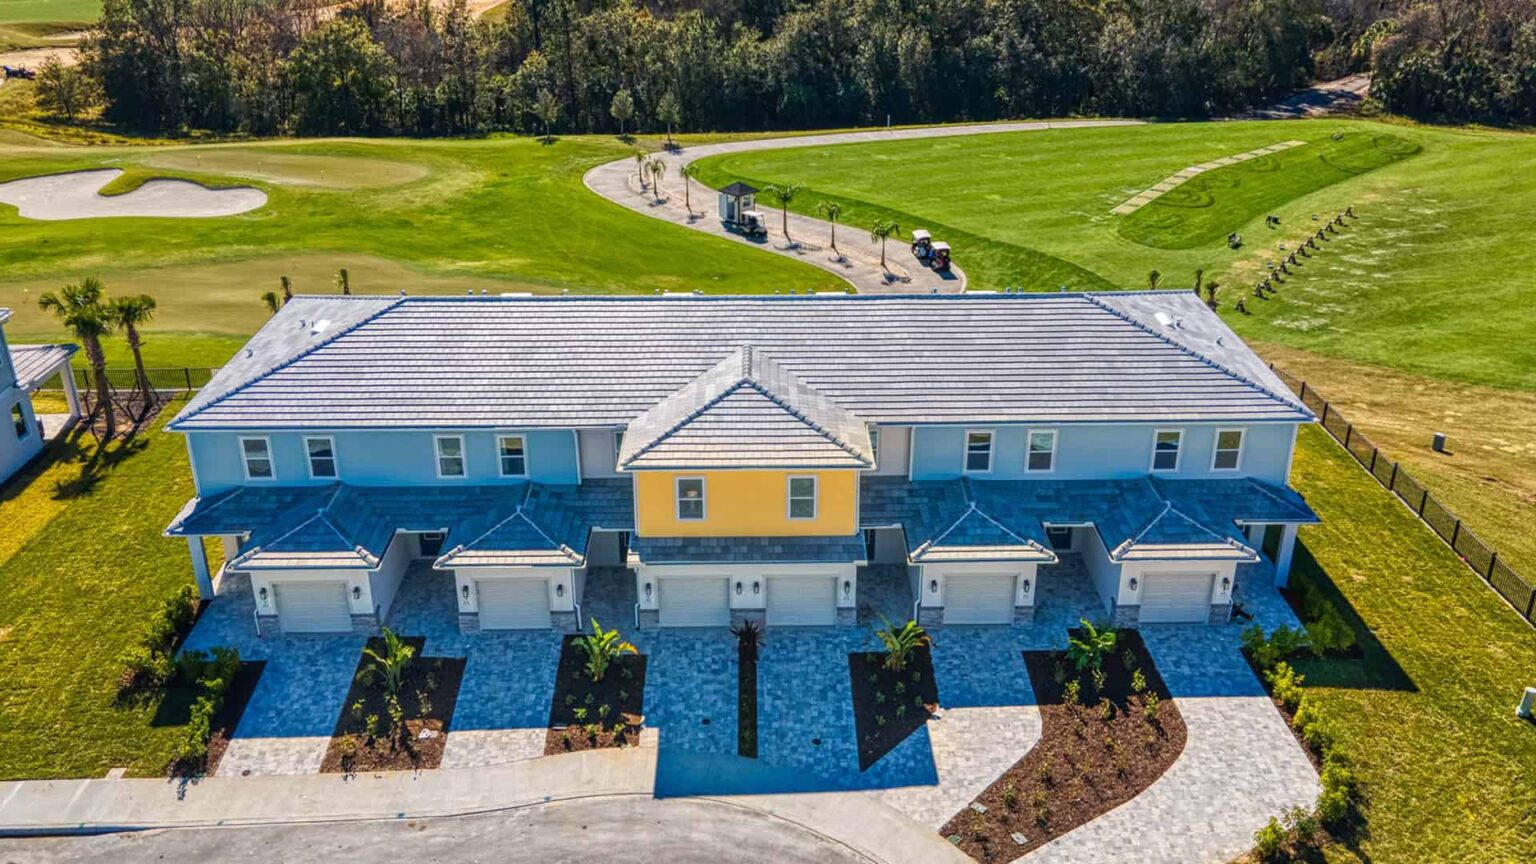 Eagle Trace Resort Orlando townhomes overlooking golf driving range.